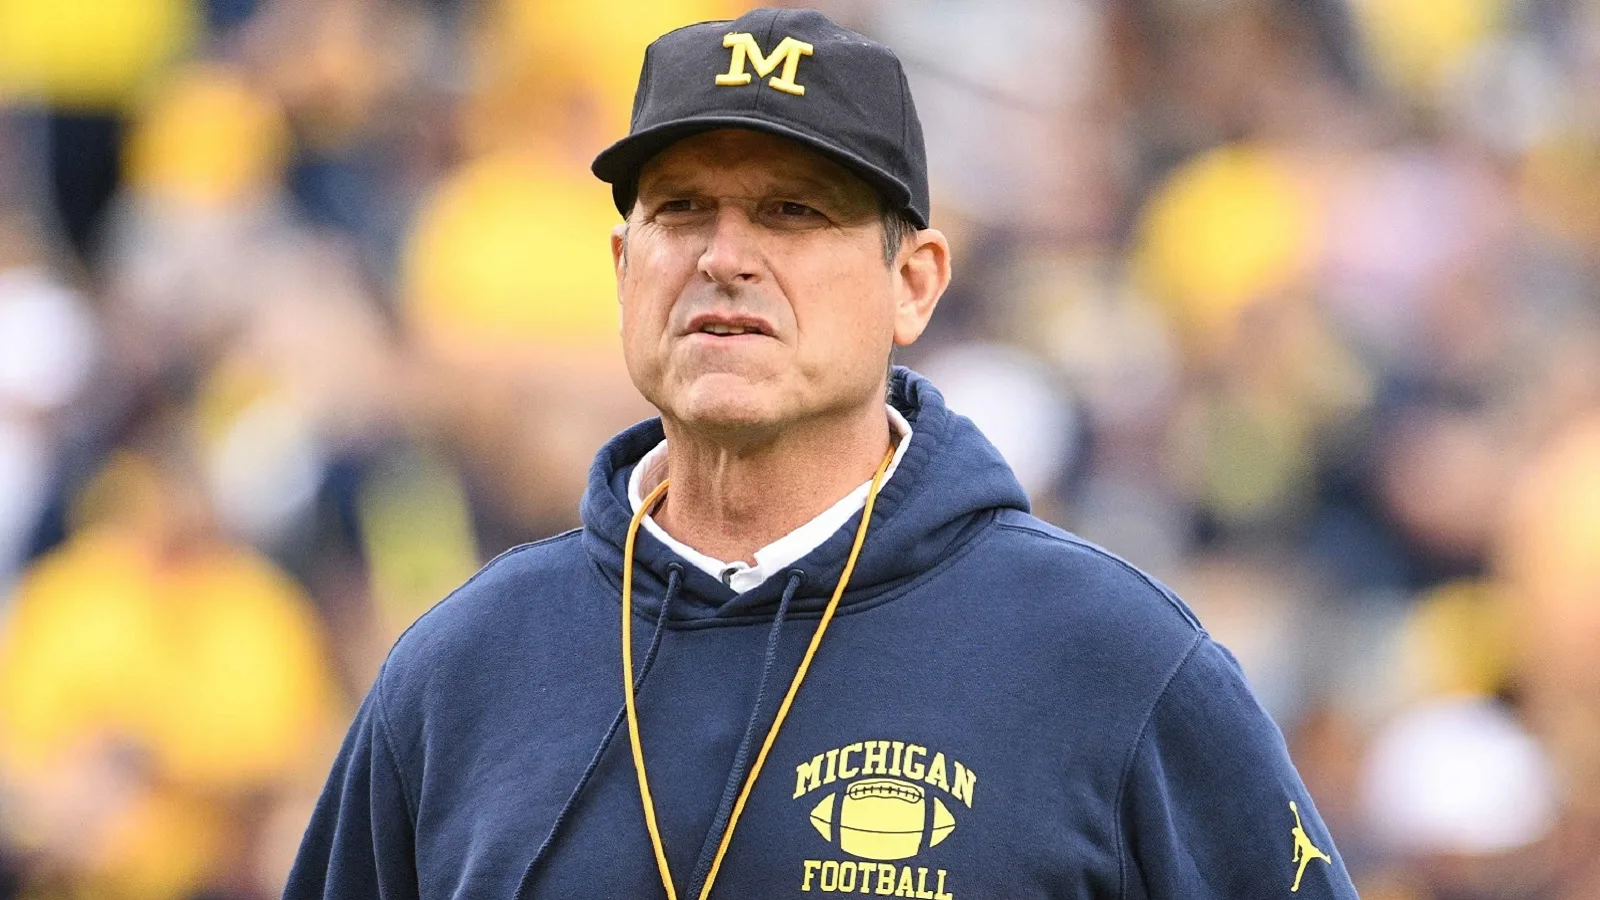 Jim Harbaugh led the Michigan Wolverines to their first national title since 1997, once guided the San Francisco 49ers to the Super Bowl (although they lost that one), and is currently interviewing for NFL coaching jobs. Is there a chance he'll return to Michigan? Yes, but no matter where he is, TFB columnist Joe Hale says hire Harbaugh at your own peril. (Photo courtesy of NEWSBREAK.COM)